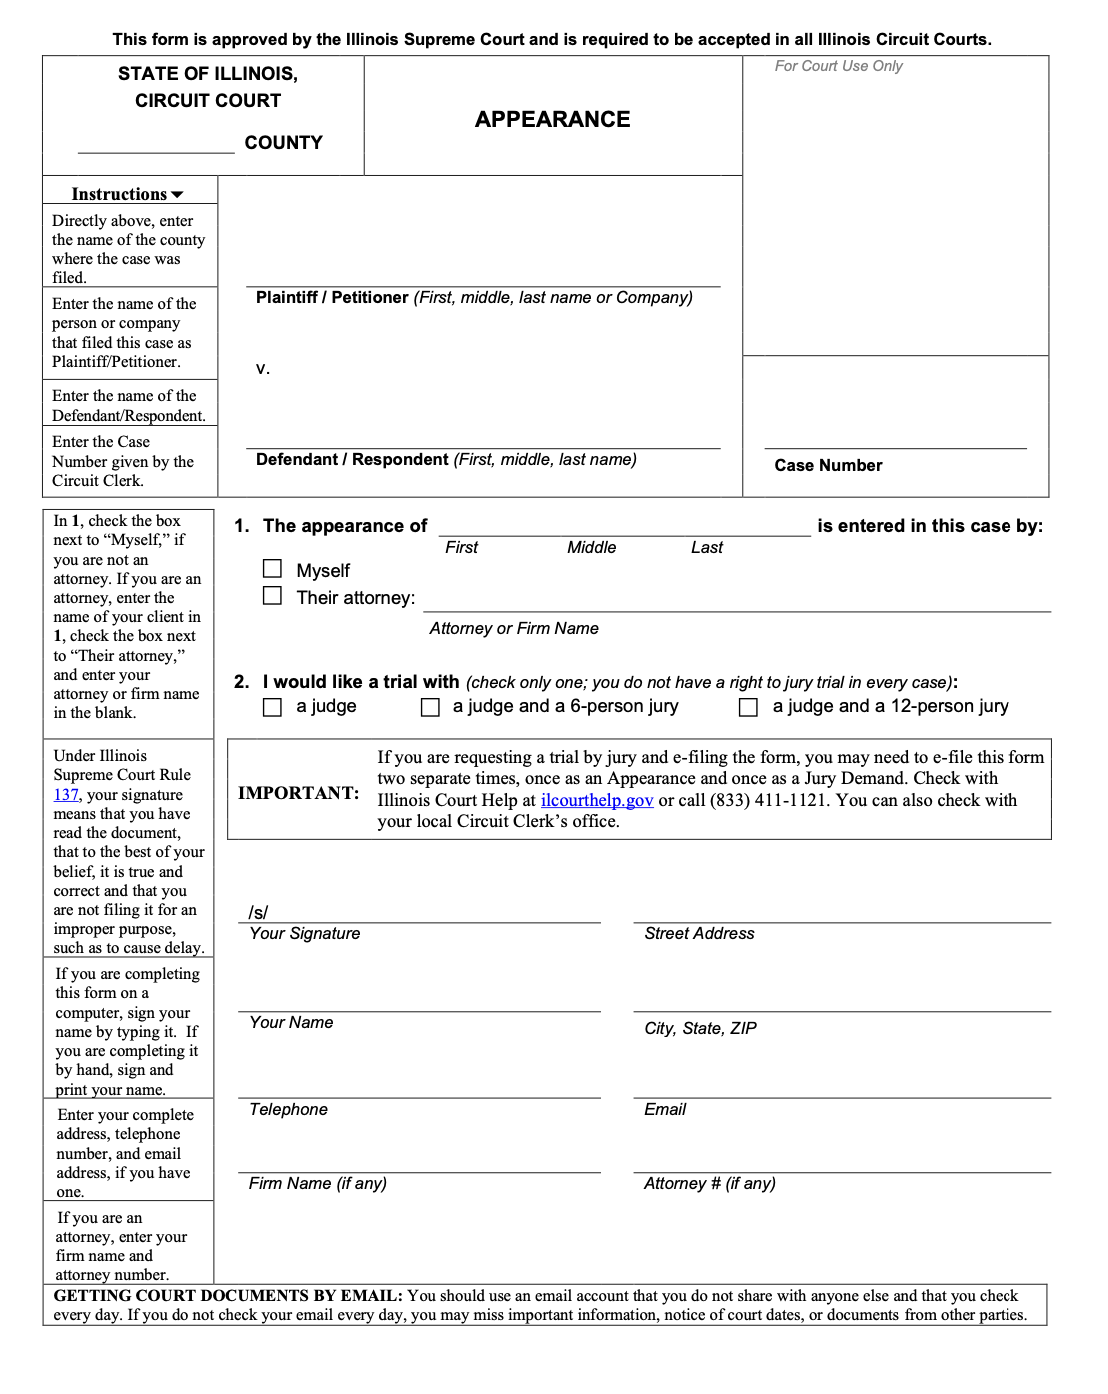 Image of a blank Illinois Appearance Form